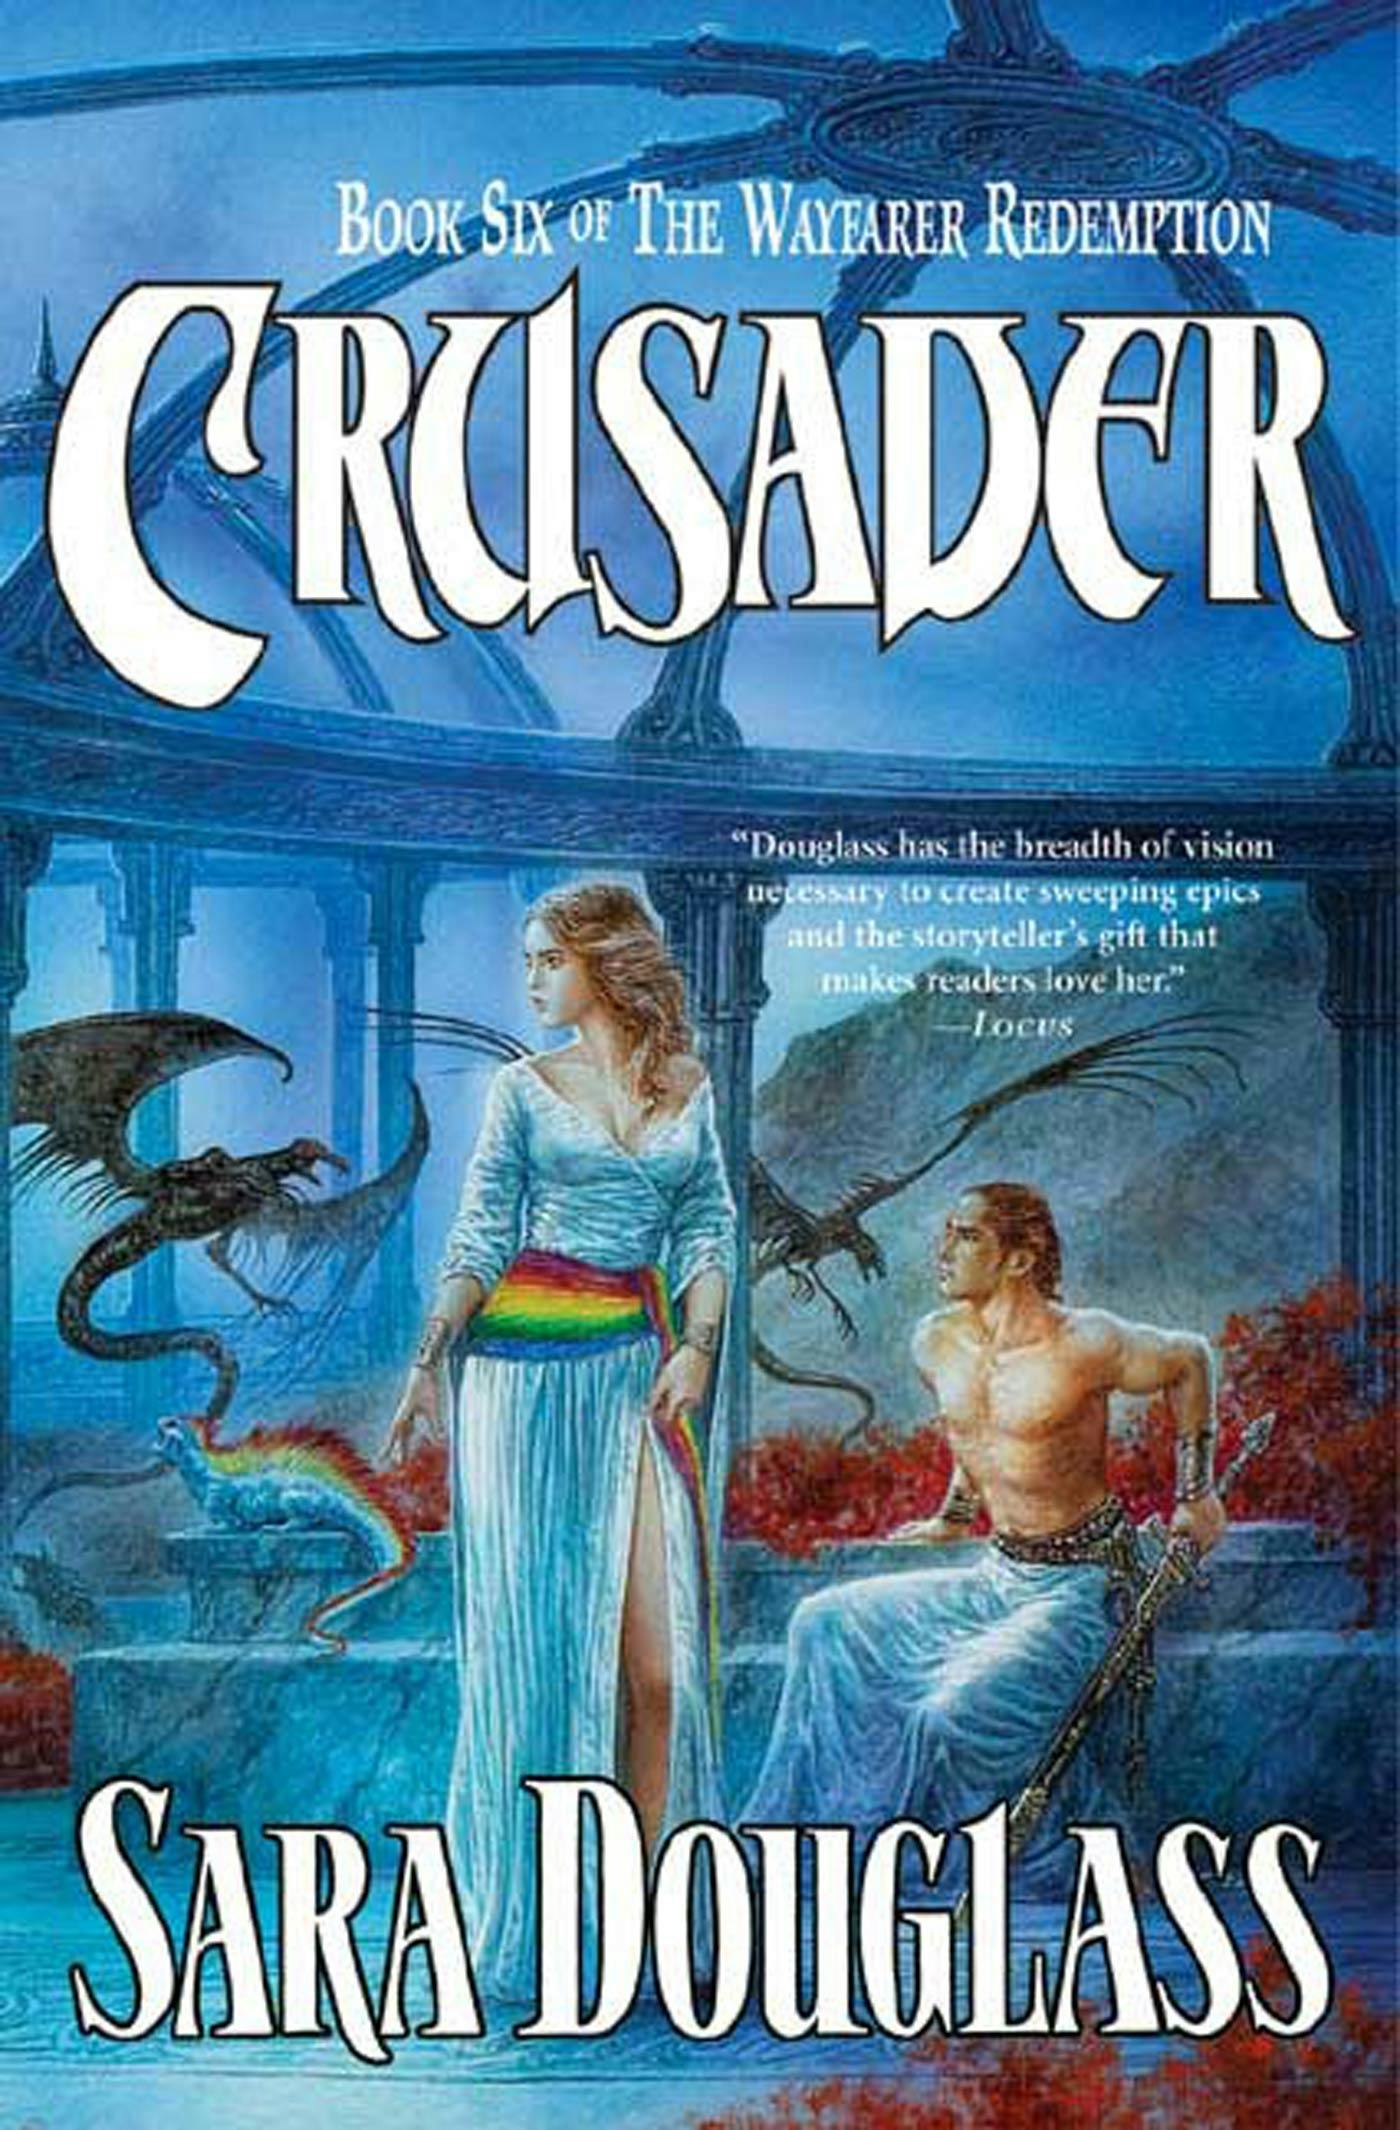 Cover for the book titled as: Crusader